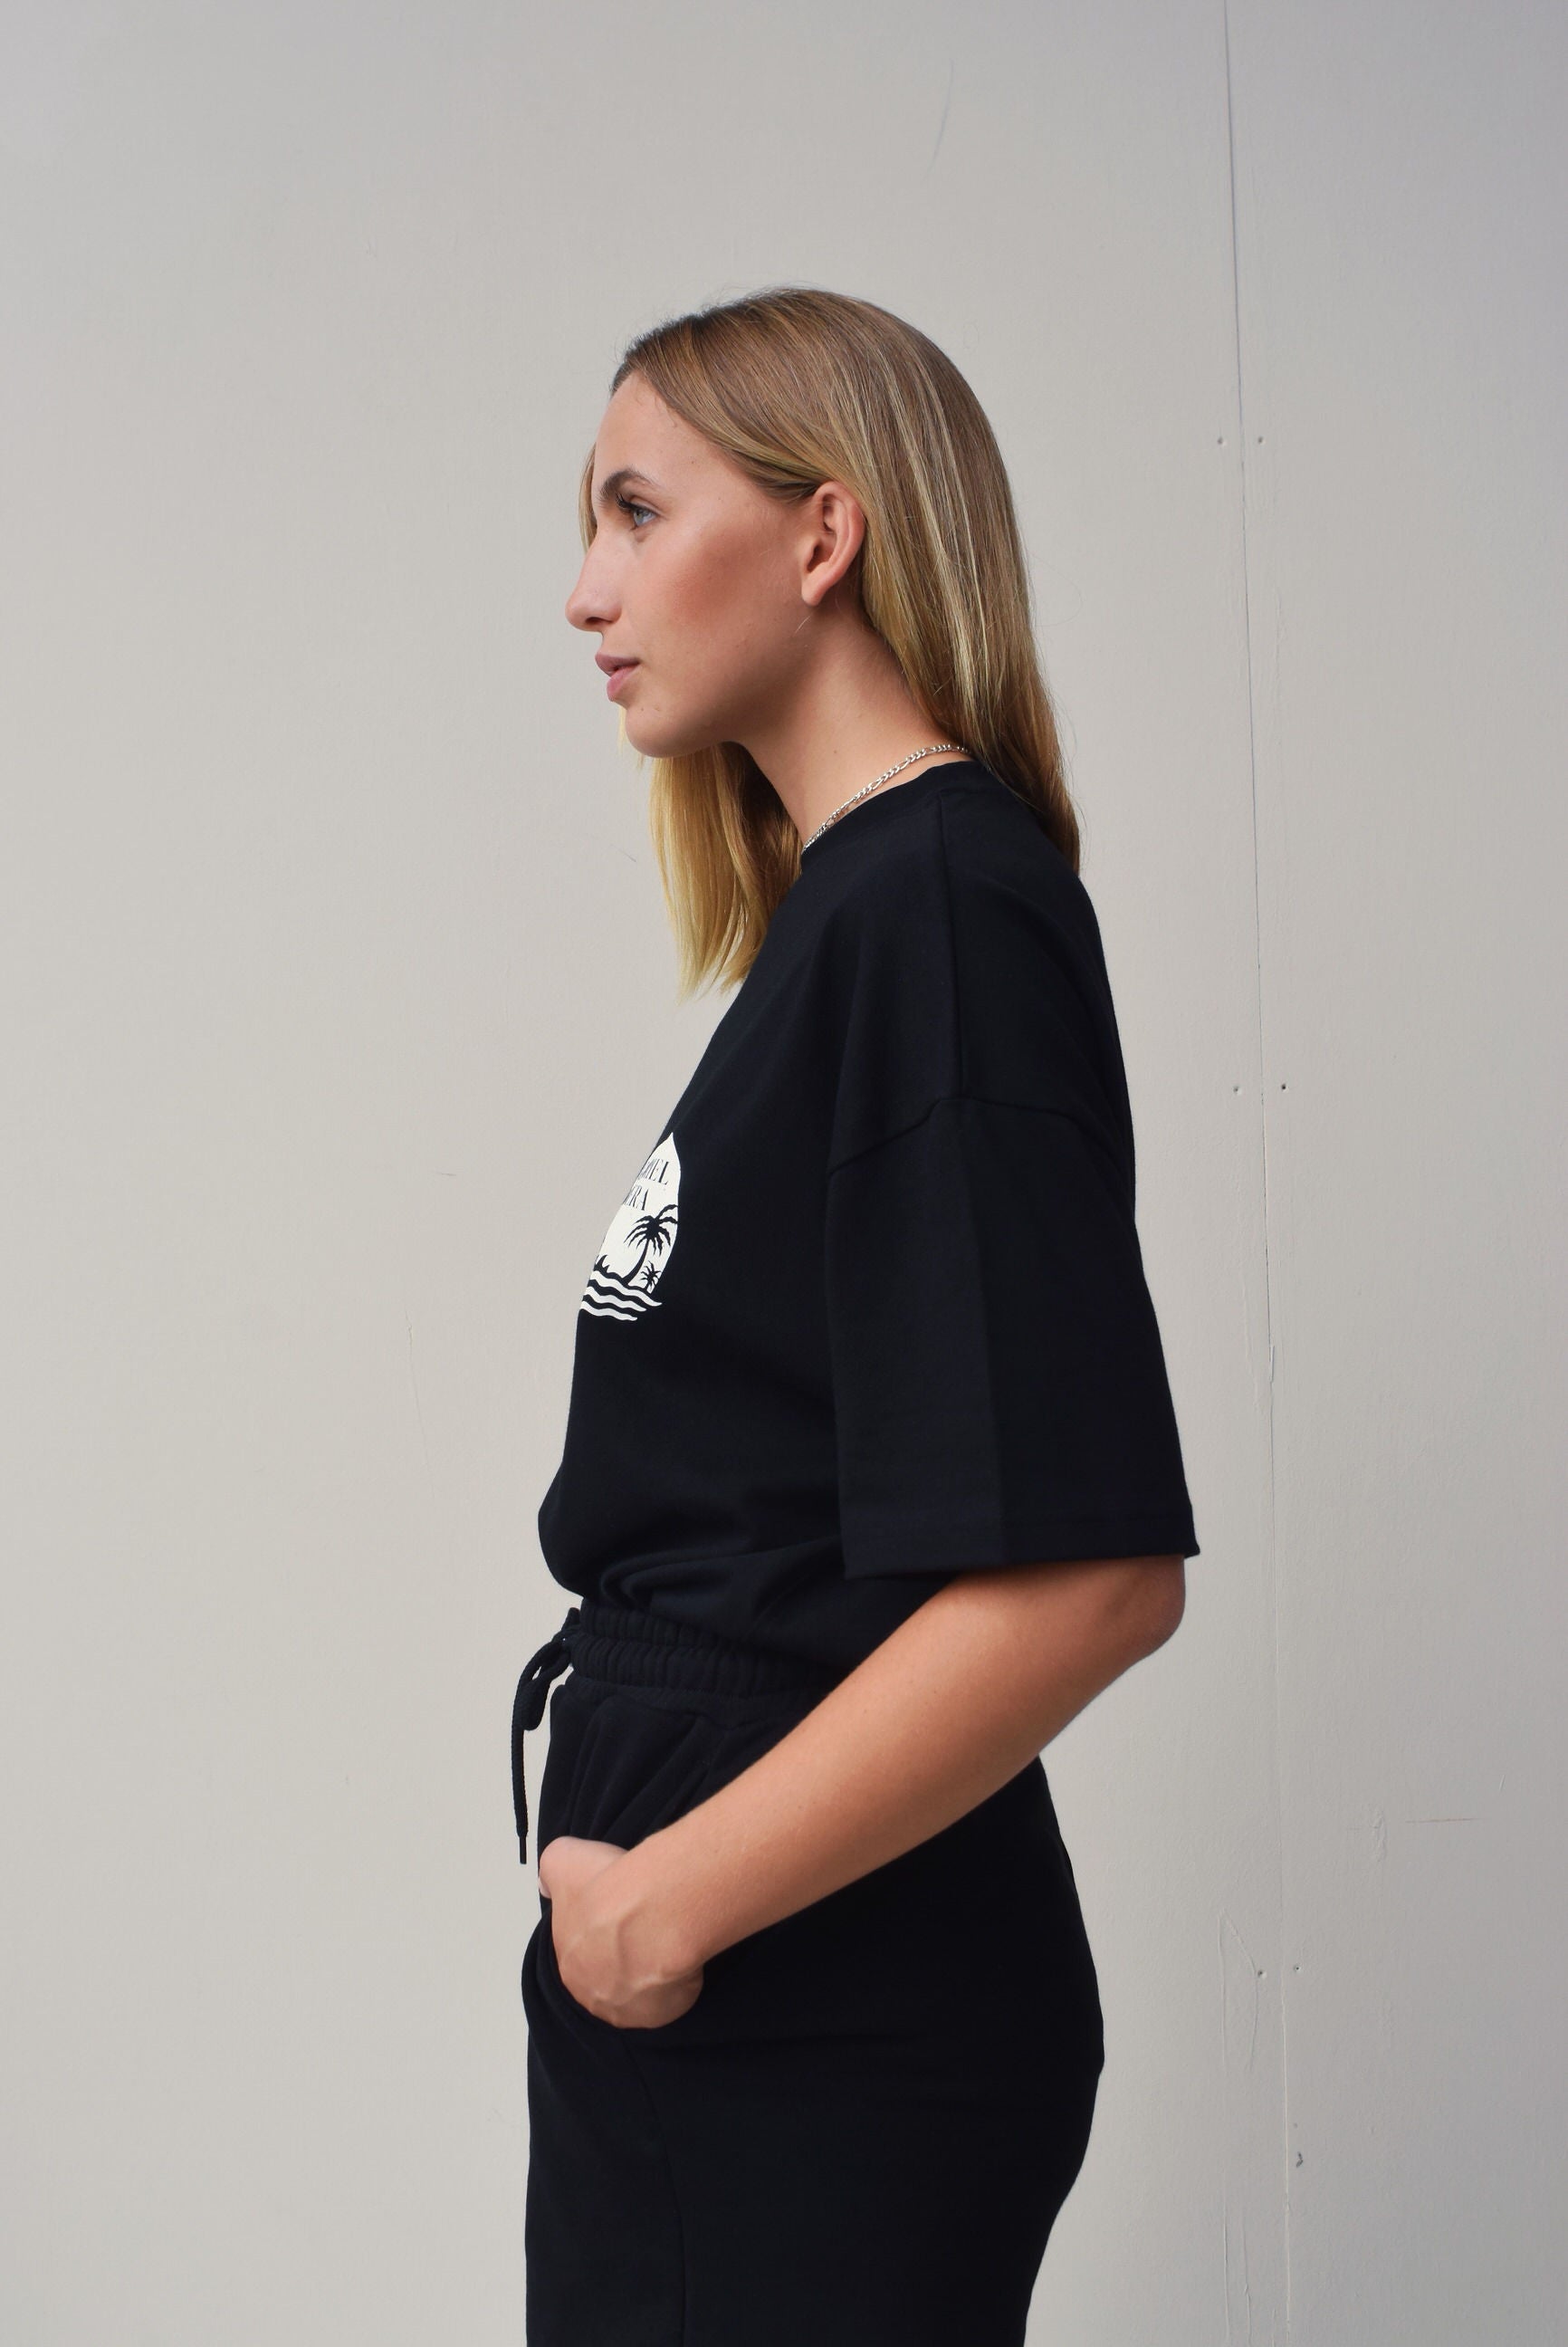 Female model wearing a Black oversize Tshirt with round brand design